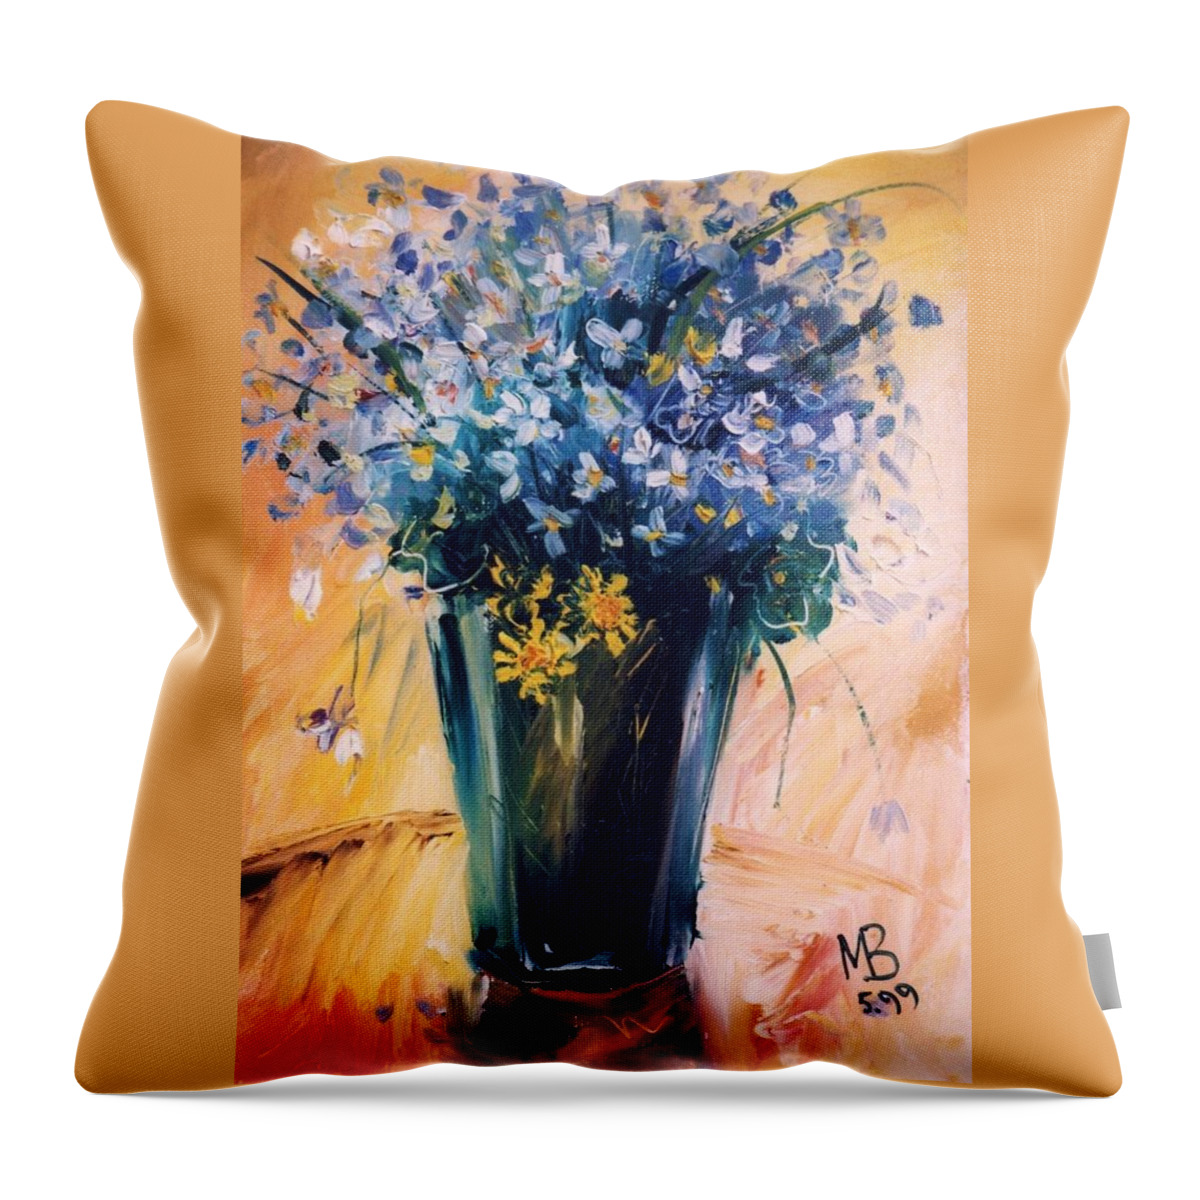  Throw Pillow featuring the painting Violets by Mikhail Zarovny